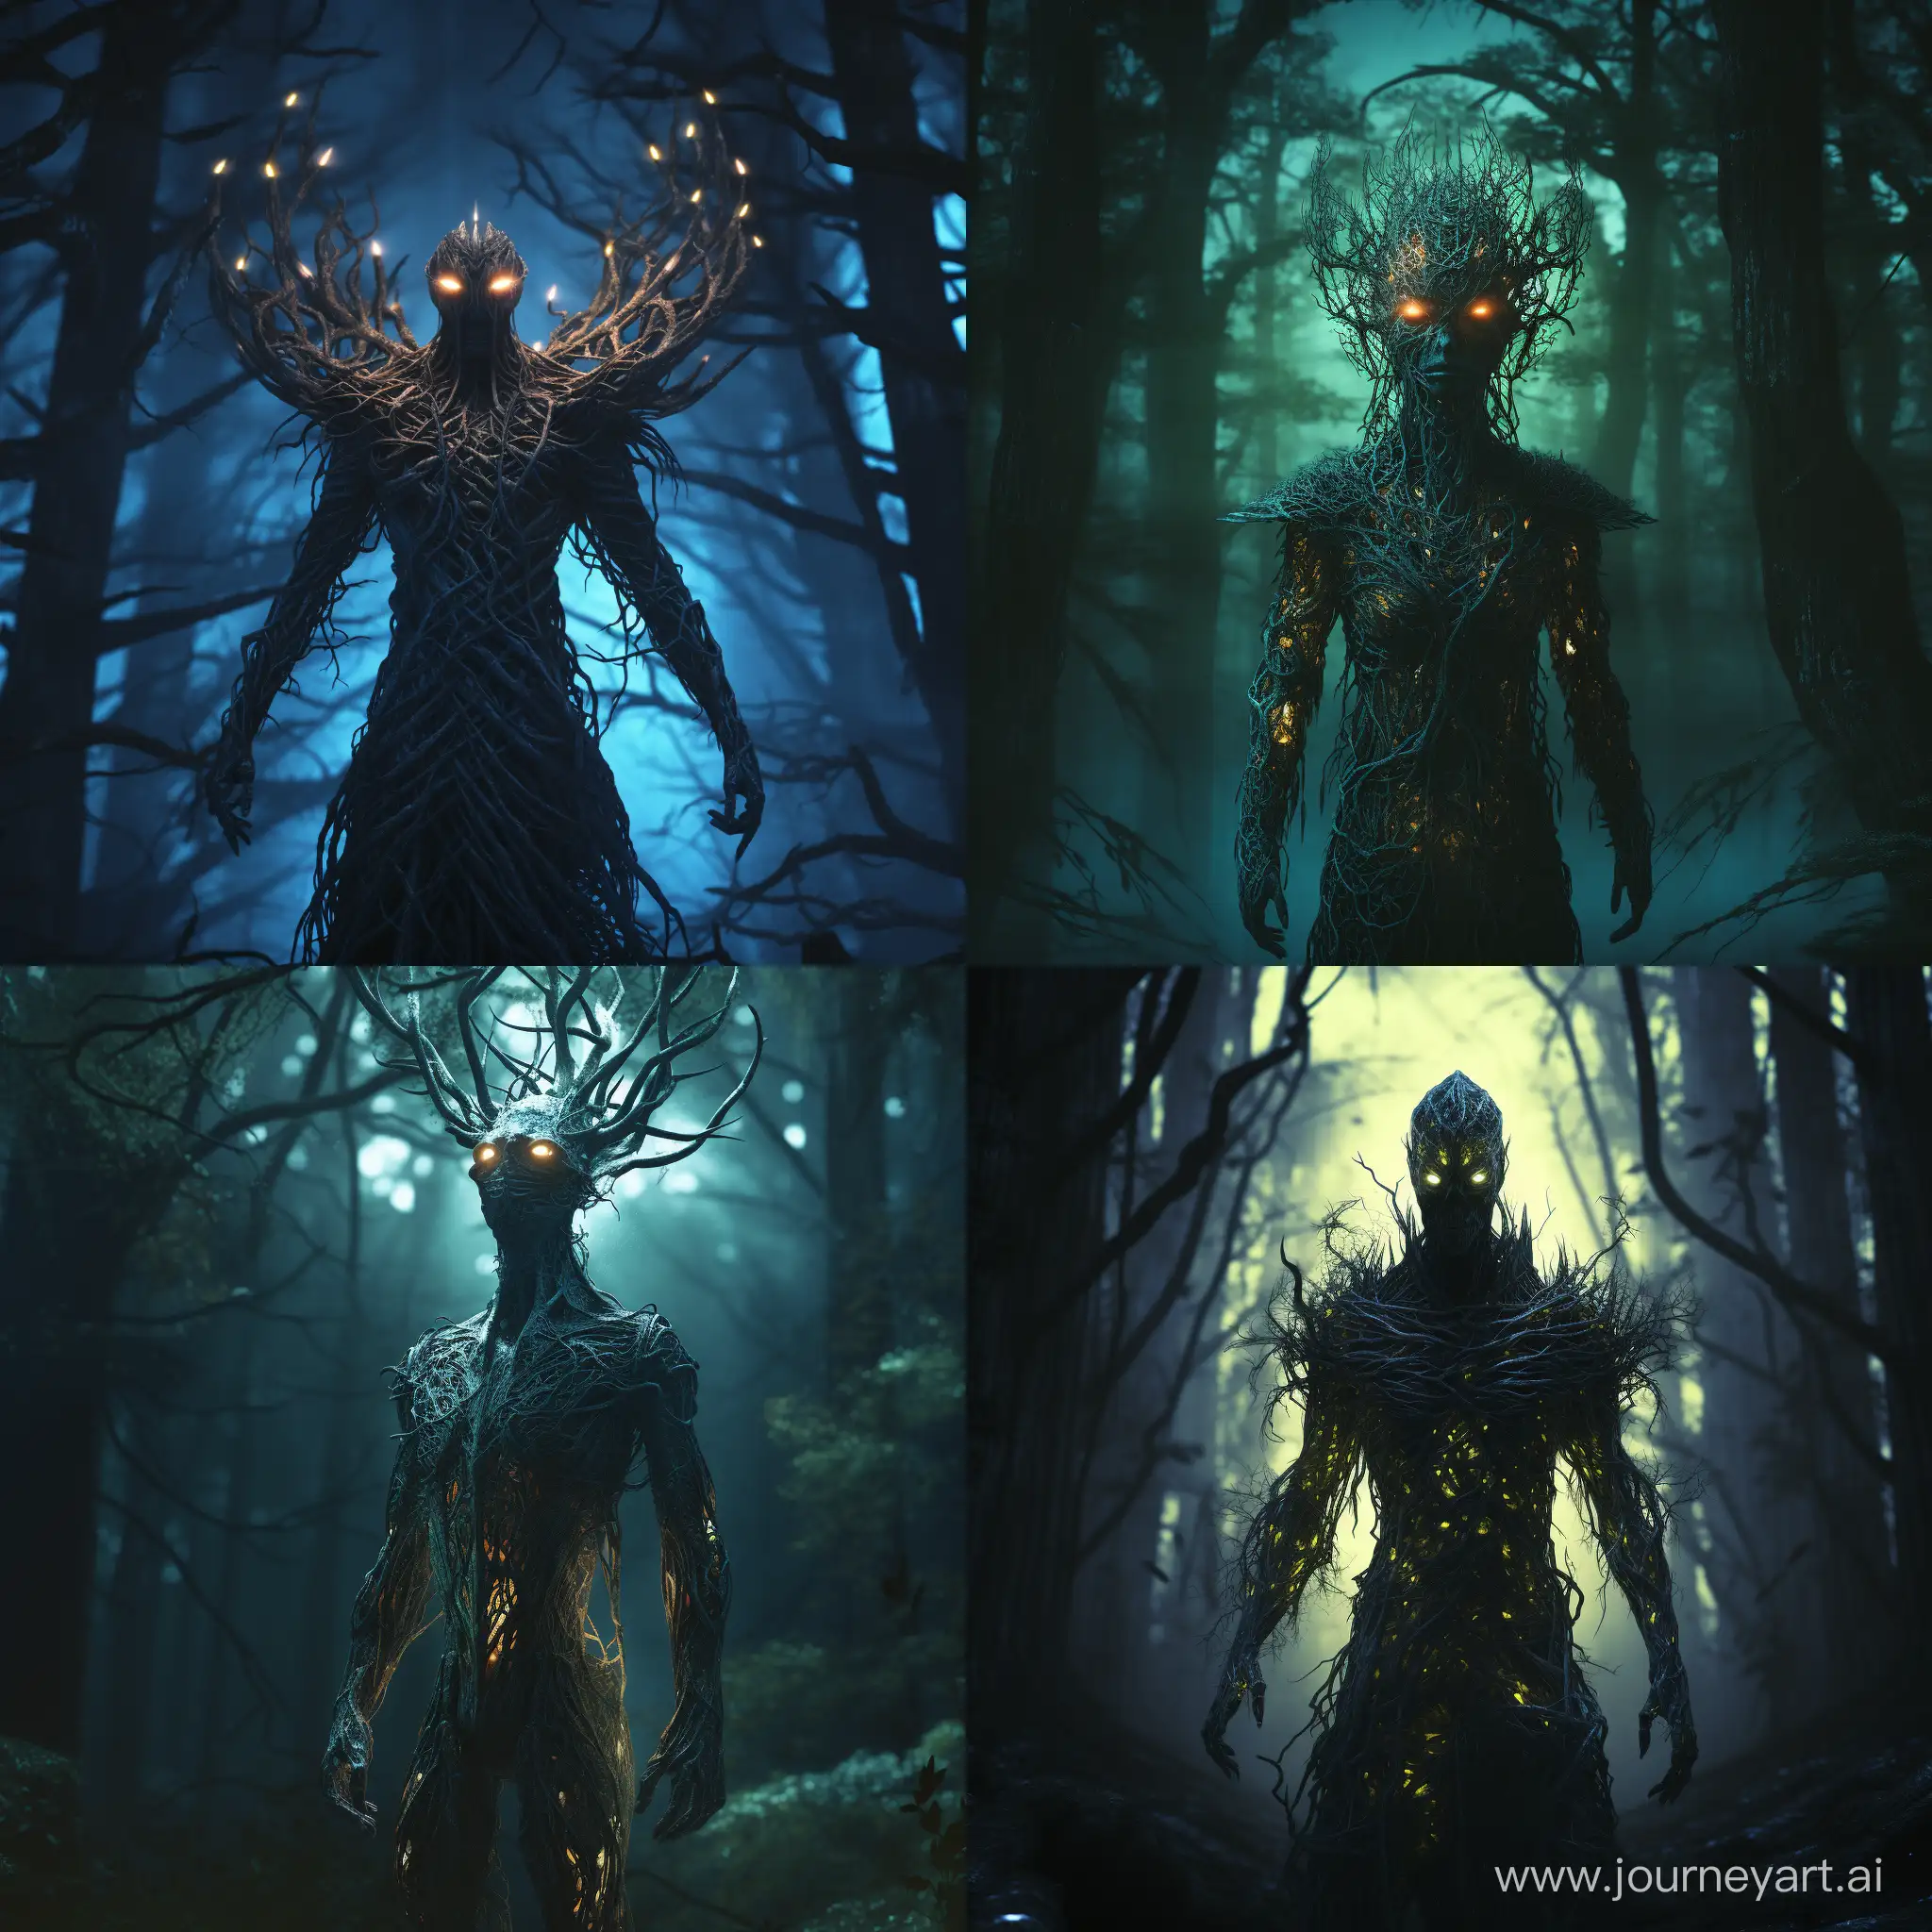 Ethereal-Bioluminescent-Creature-Roaming-in-a-Gothic-Forest